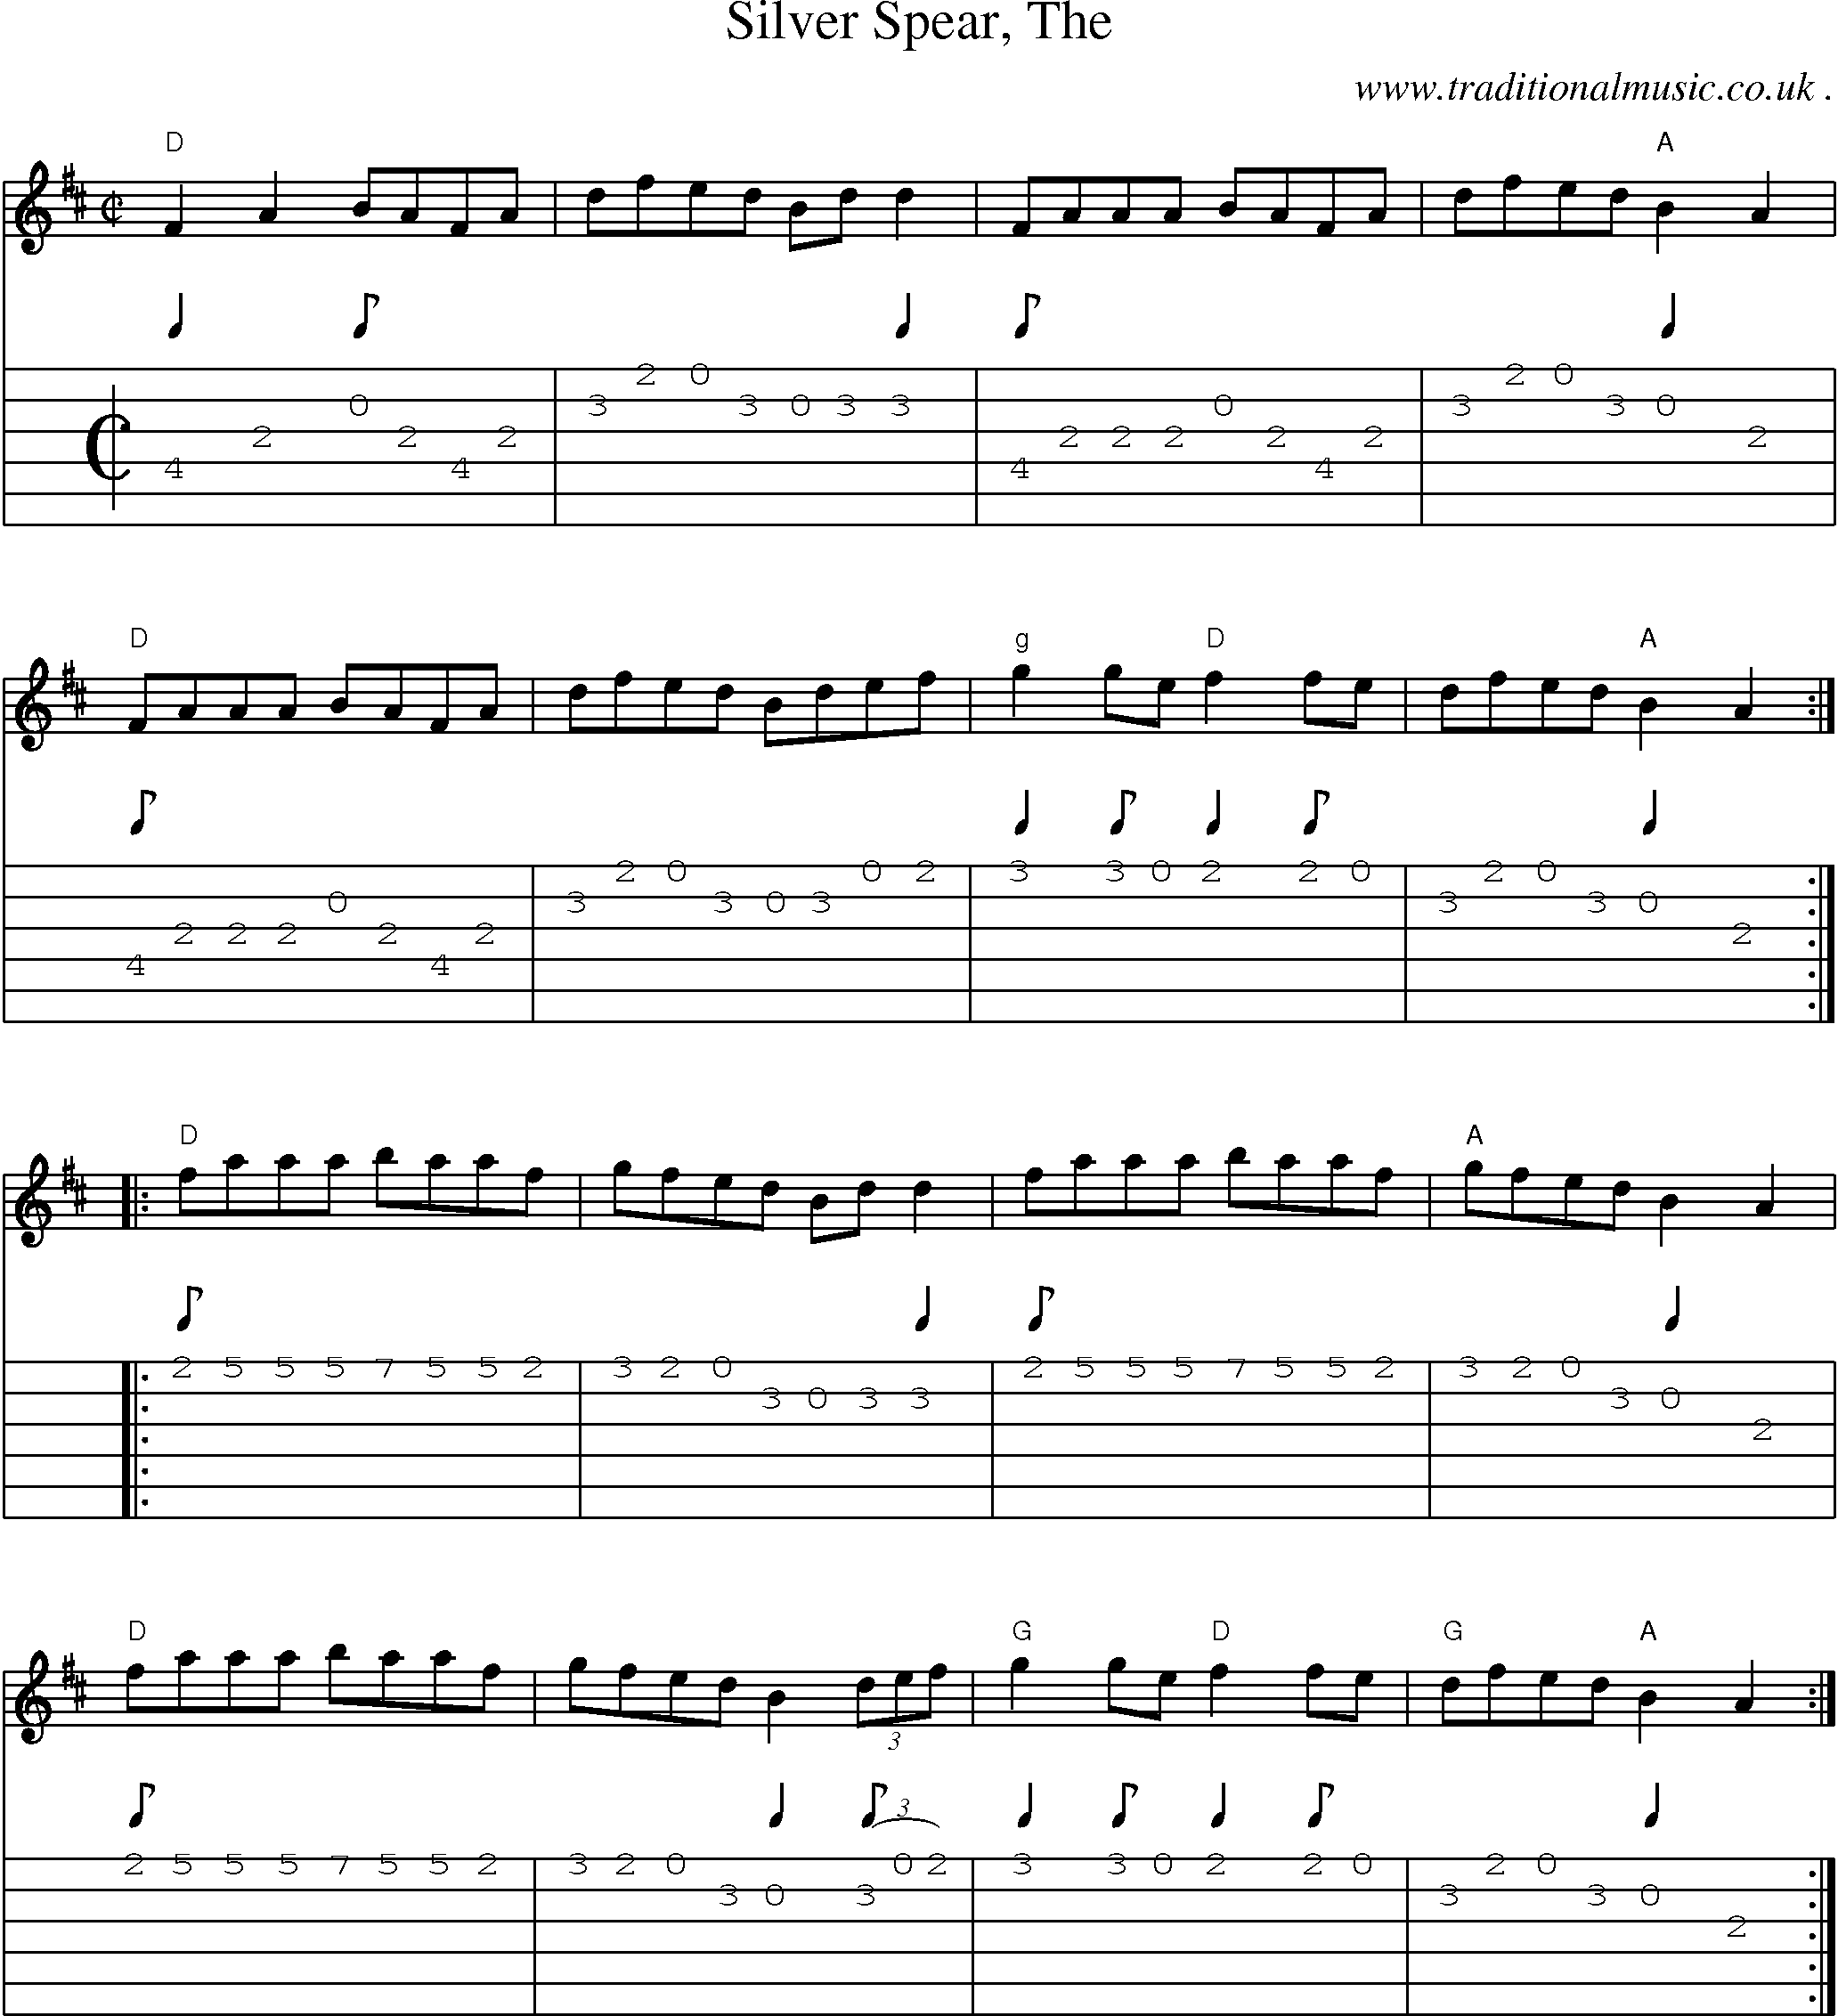 Music Score and Guitar Tabs for Silver Spear The